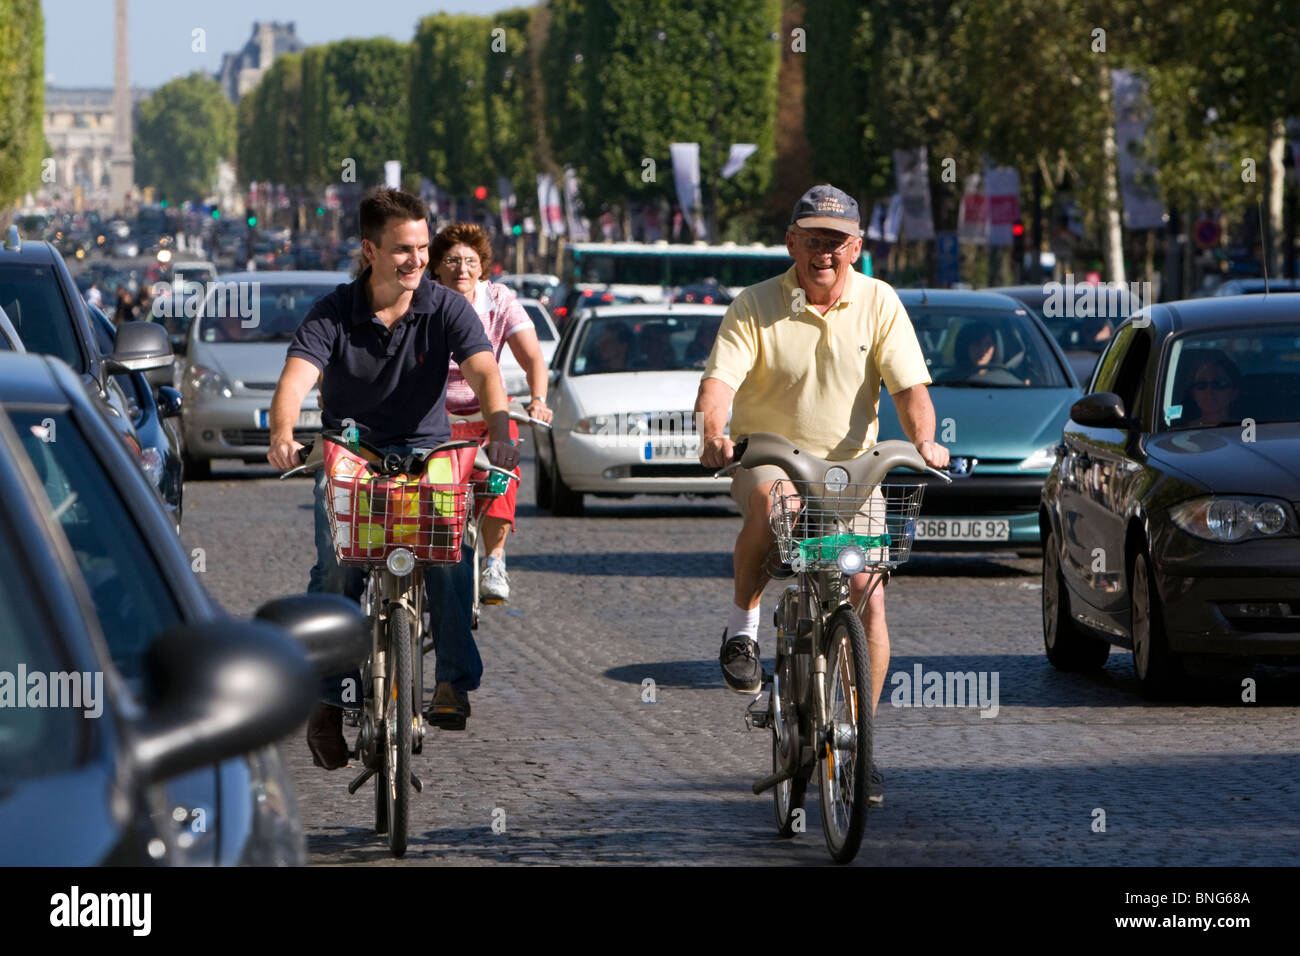 People ride bicycles along the Avenue des Champs-Elysees in Paris, France. Stock Photo